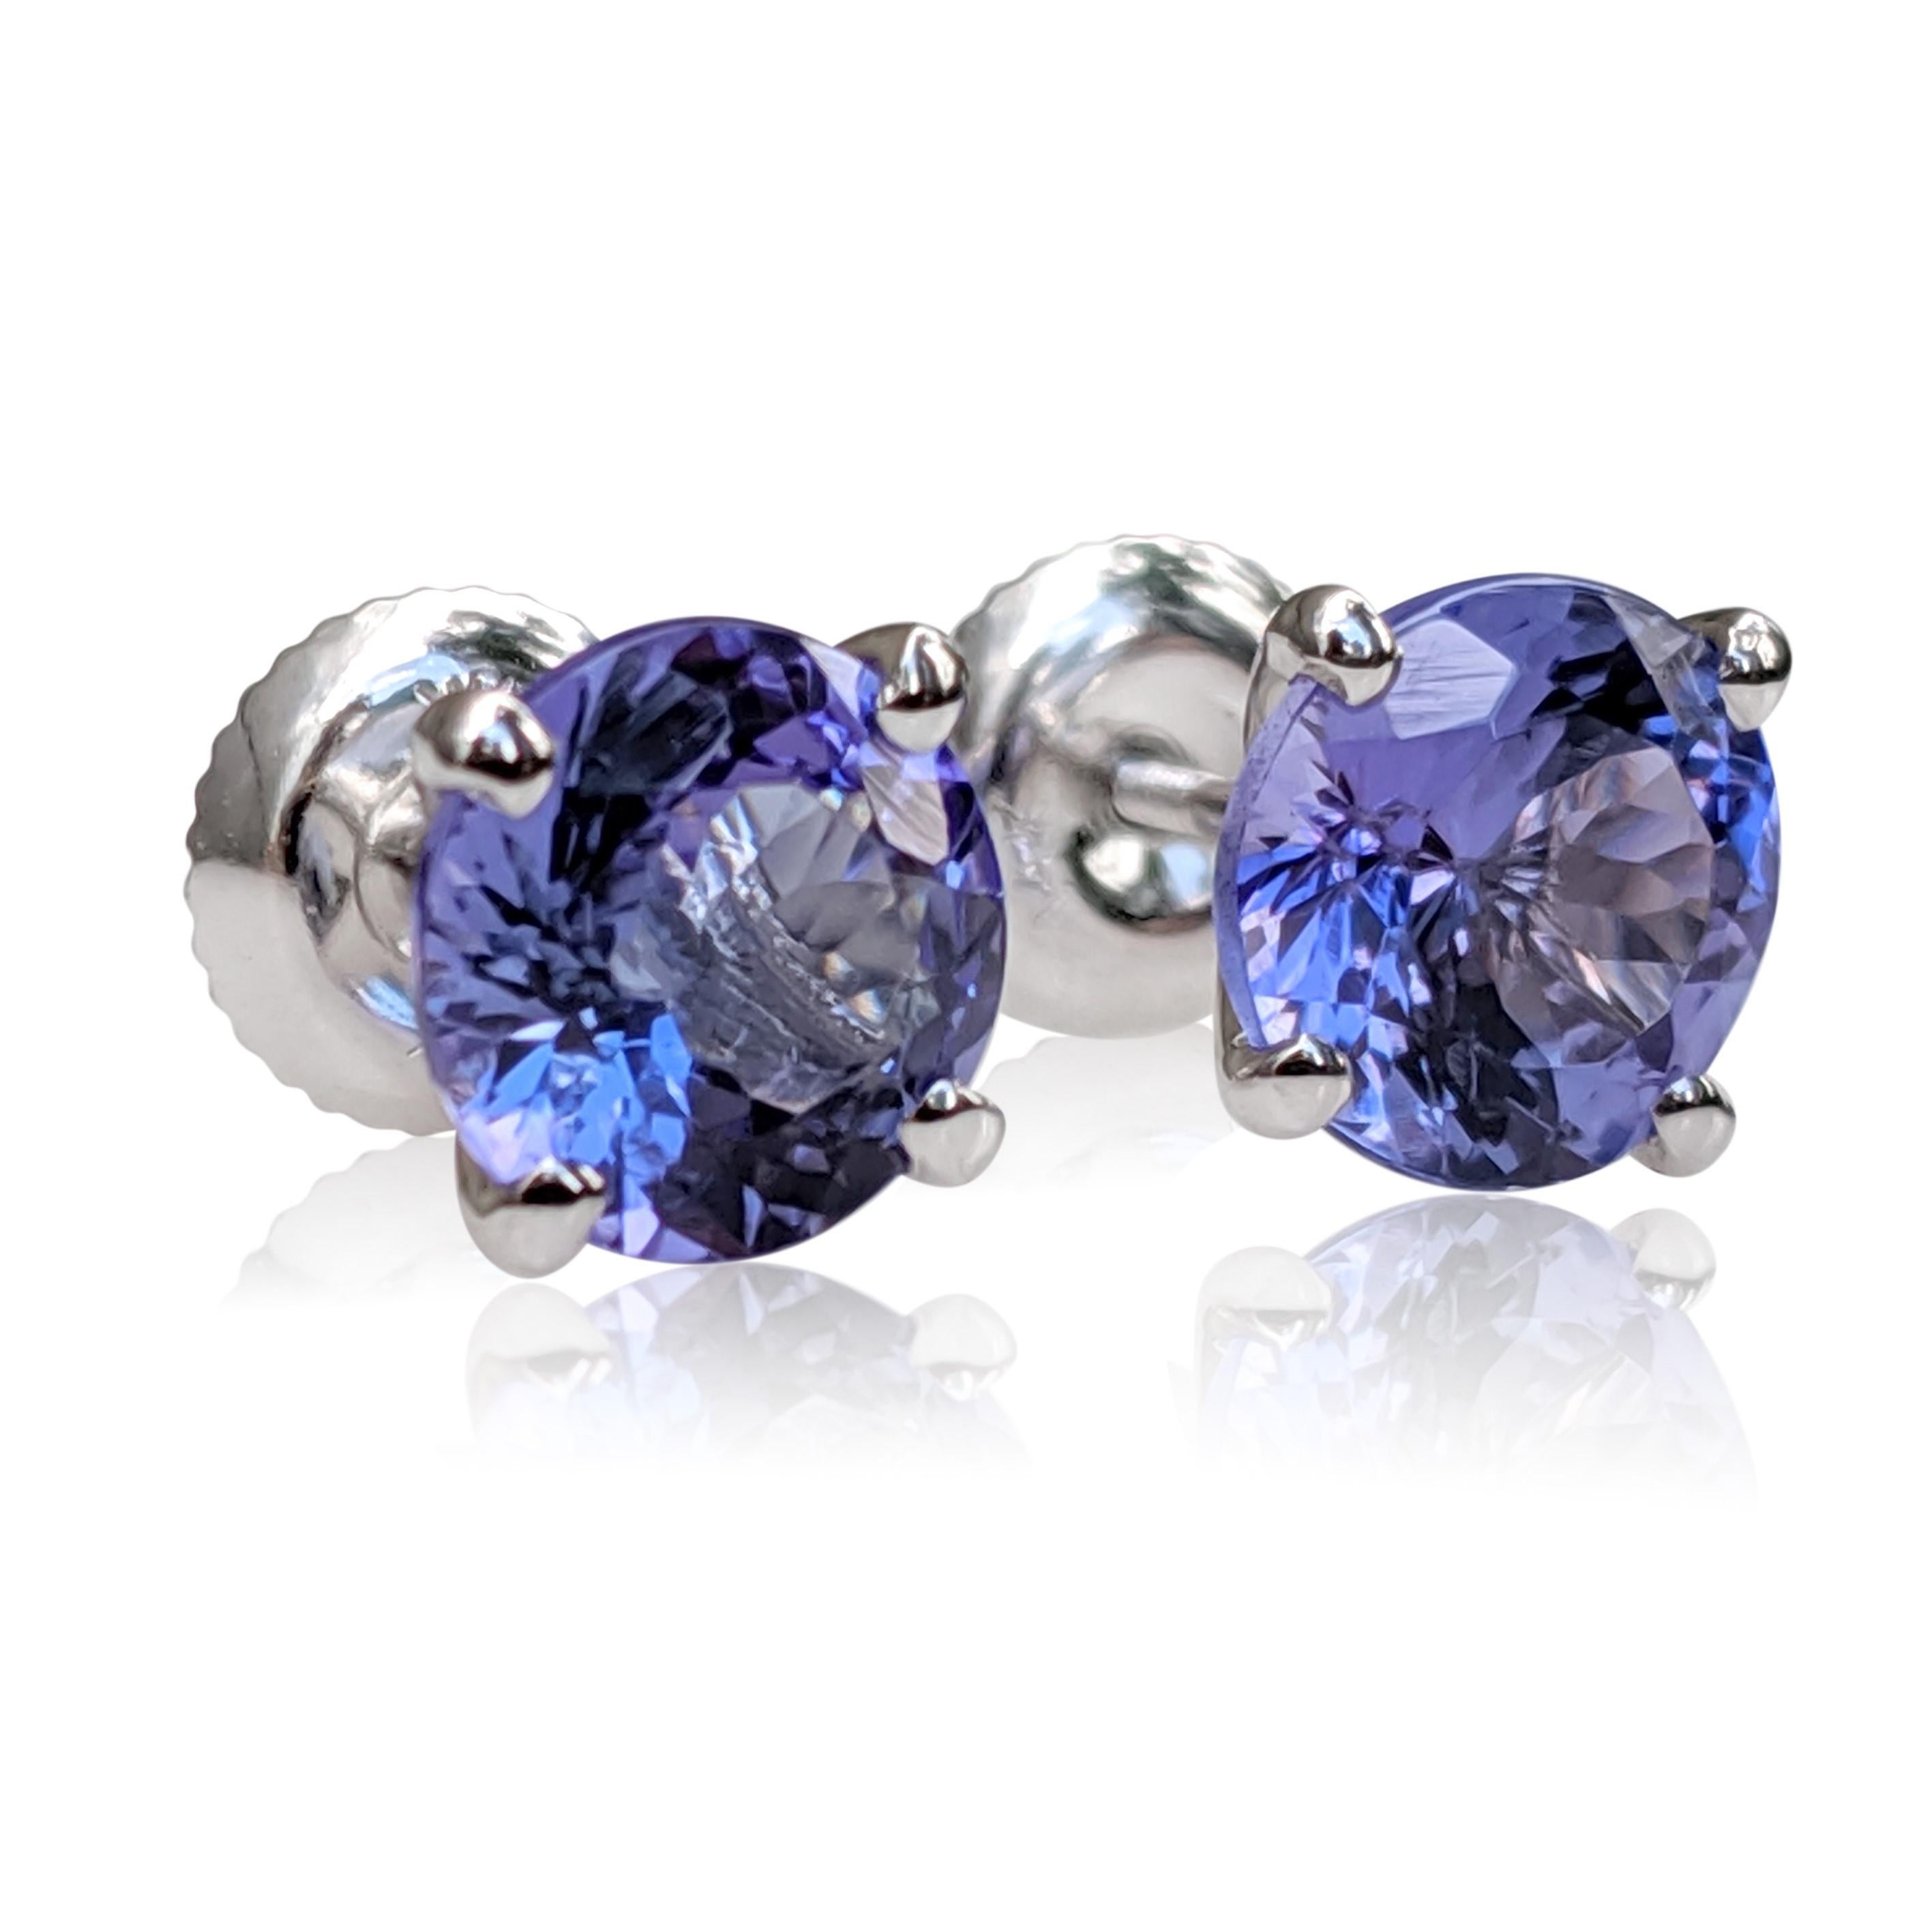 Oval Cut NO RESERVE! 2.79 Carat Tanzanite - 14 kt. White gold - Earrings For Sale